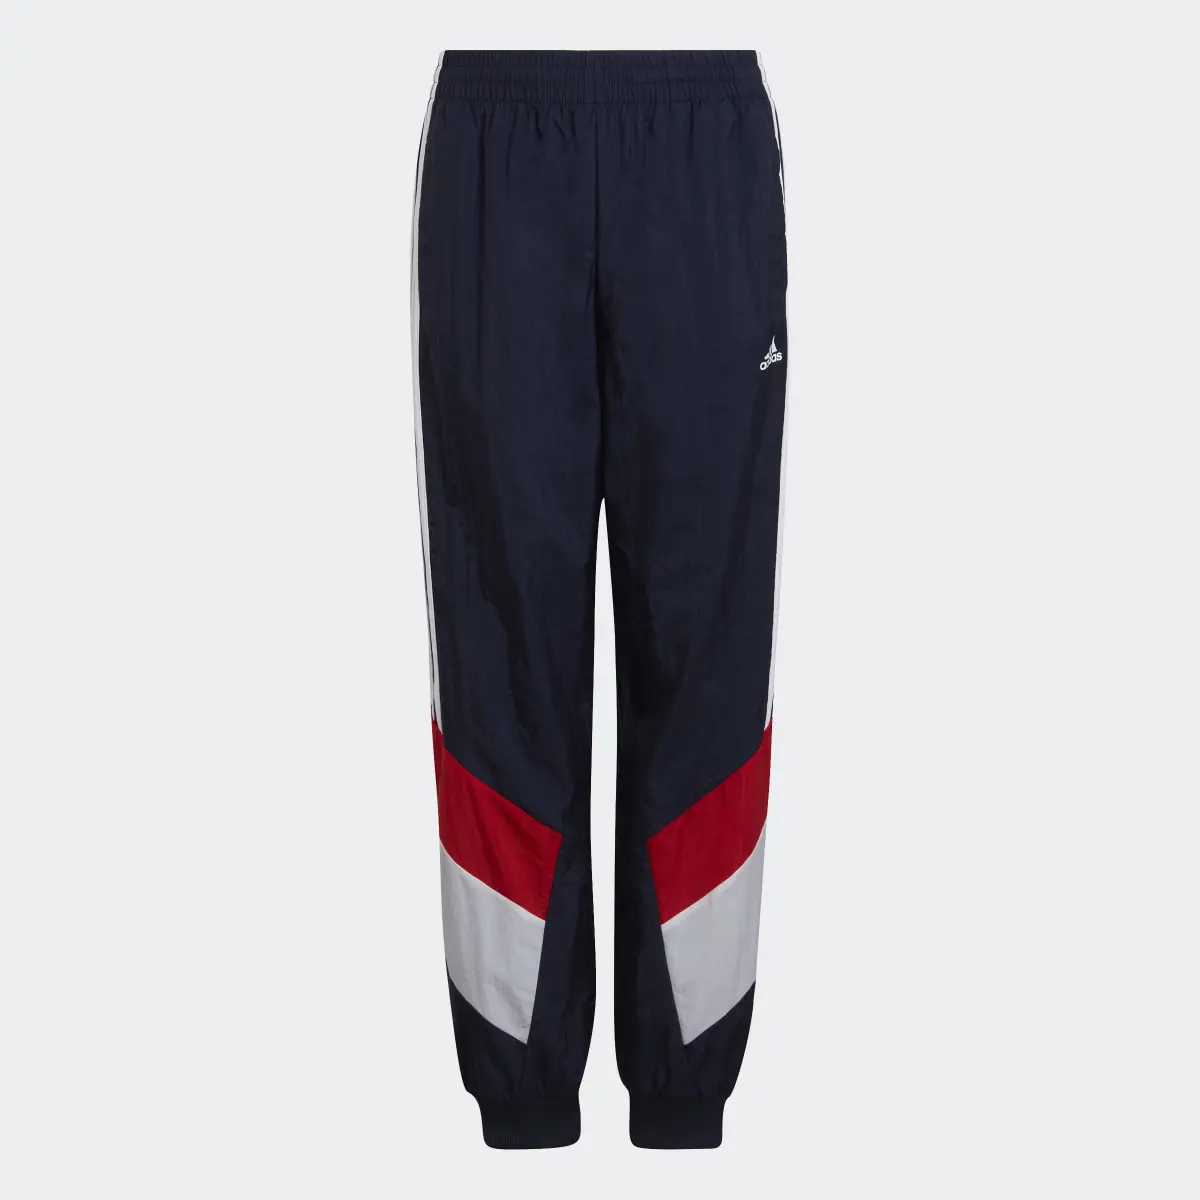 Adidas Colorblock Woven Tracksuit Bottoms. 1